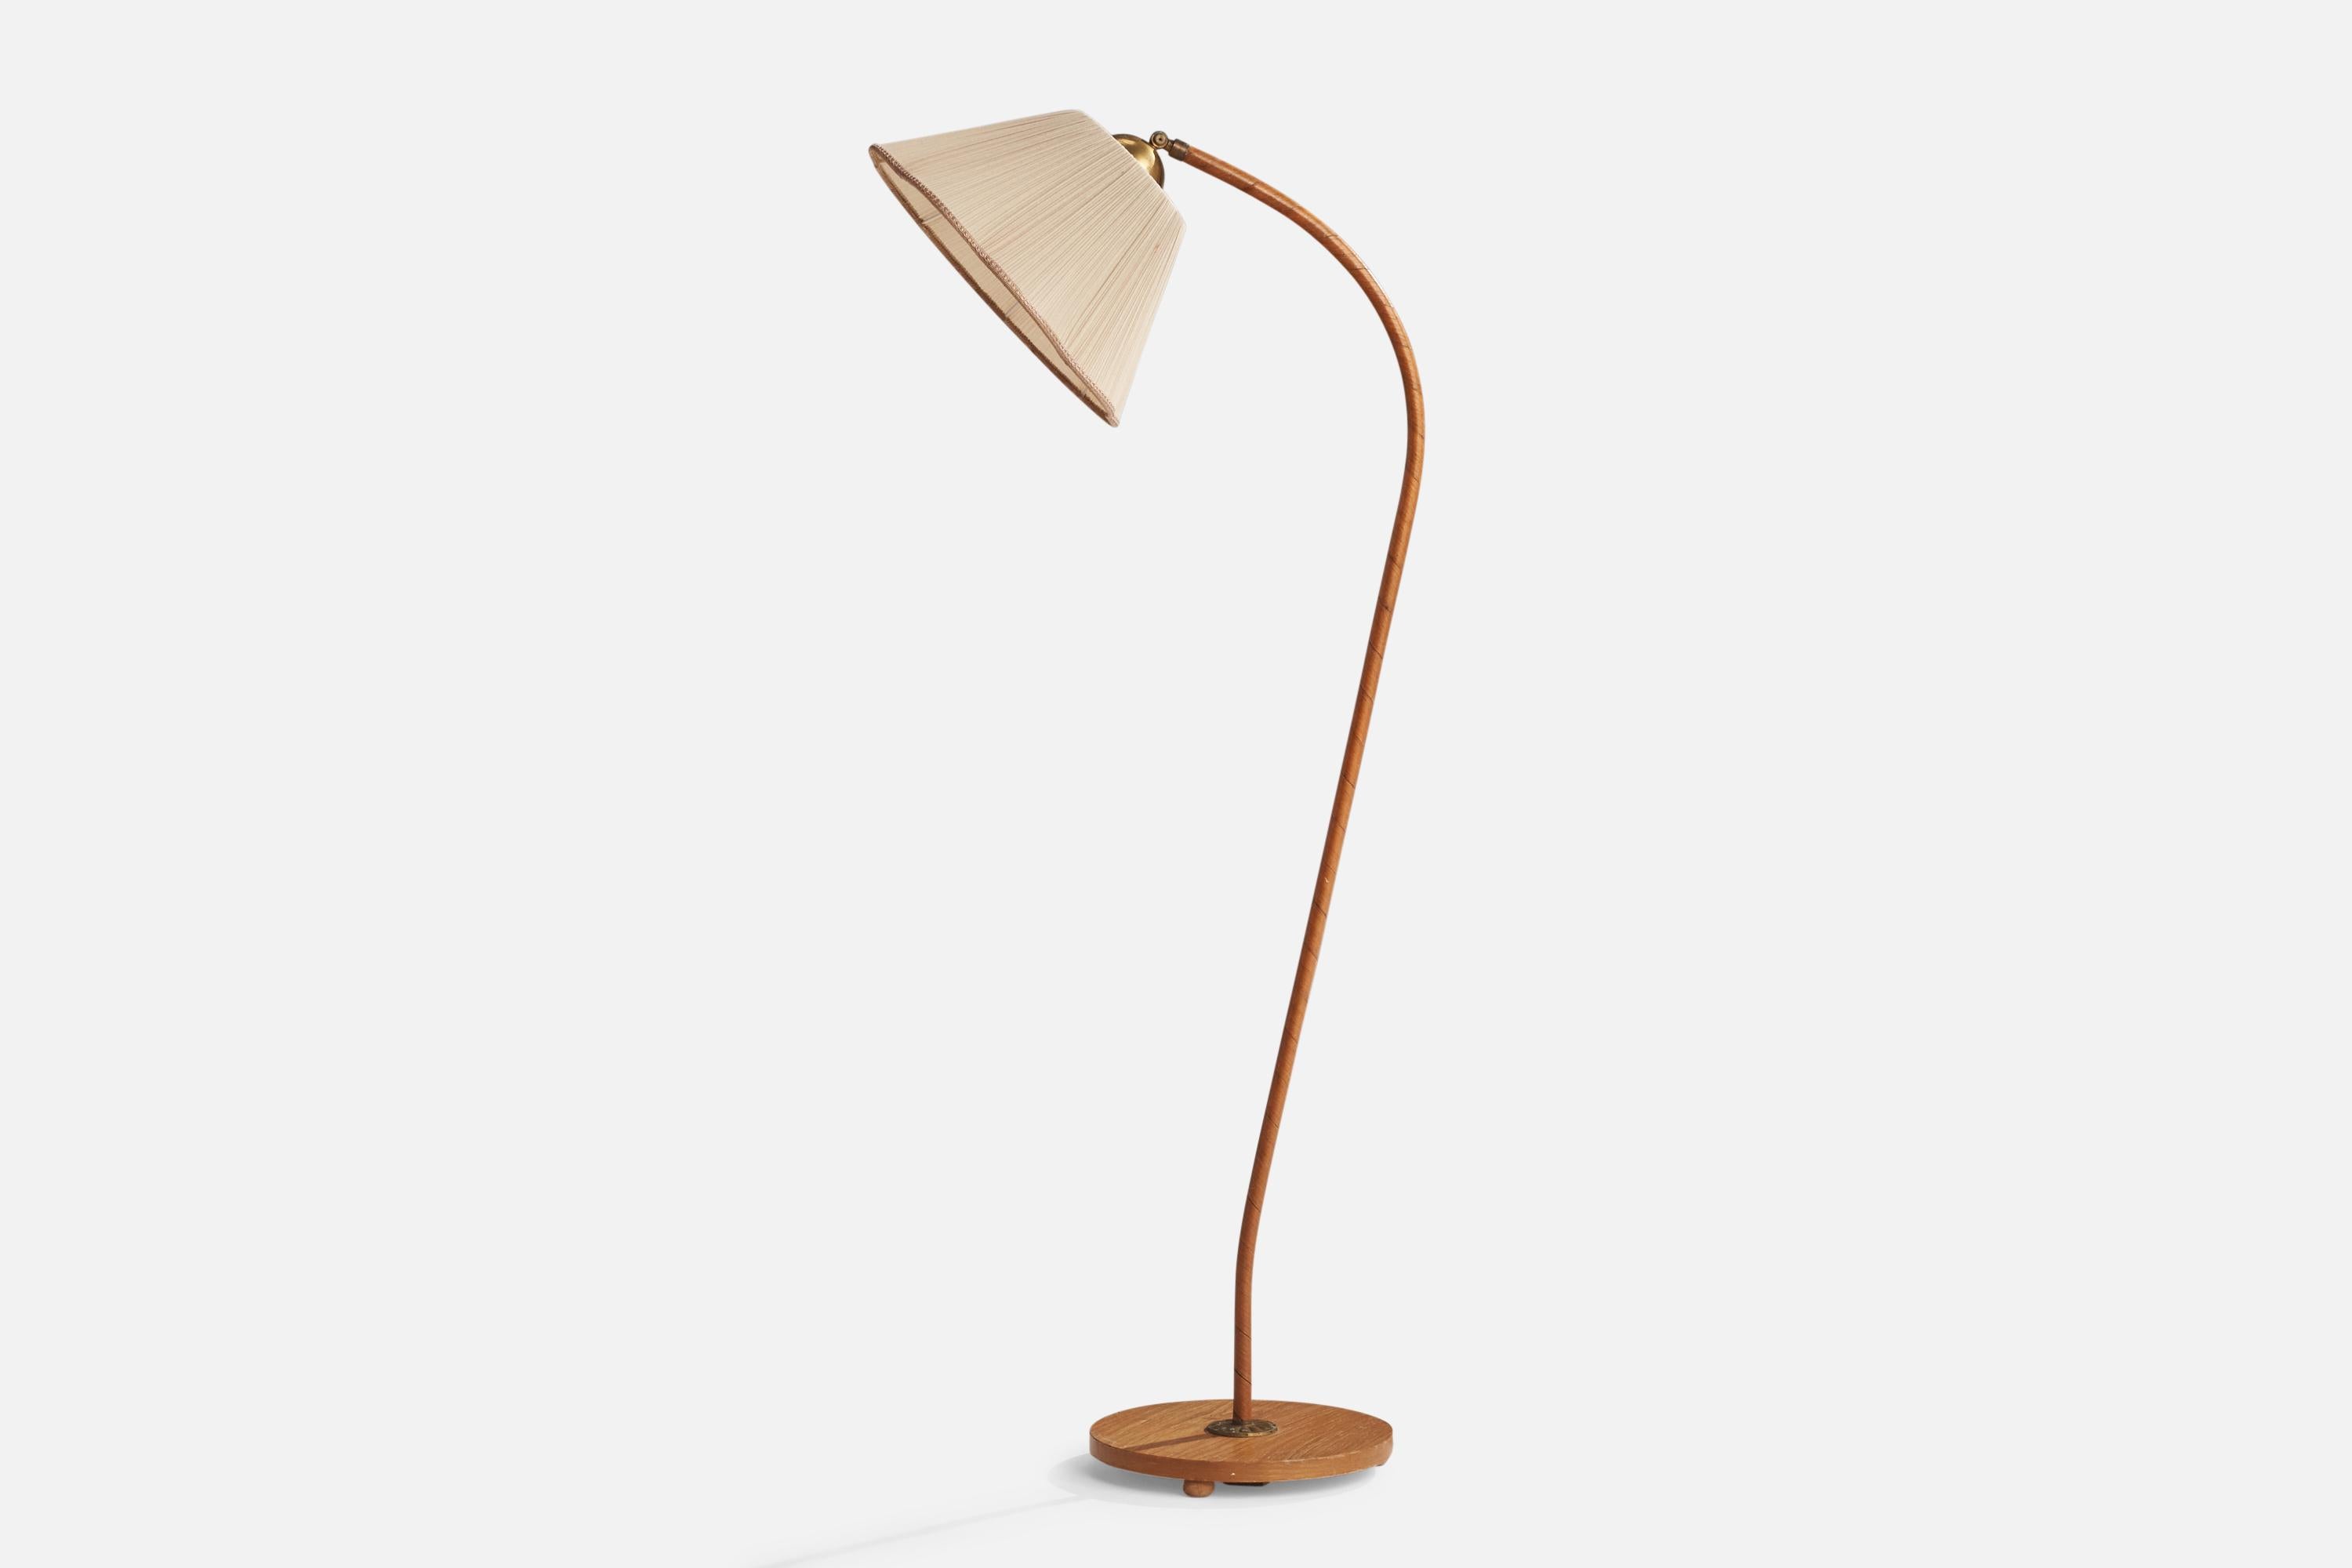 A brass, elm, wood veneer and off-white fabric floor lamp, designed and produced in Sweden, c. 1940s.

Overall Dimensions (inches): 56” H x 15” W x 23” D
Stated dimensions include shade.
Bulb Specifications: E-26 Bulb
Number of Sockets: 1
All